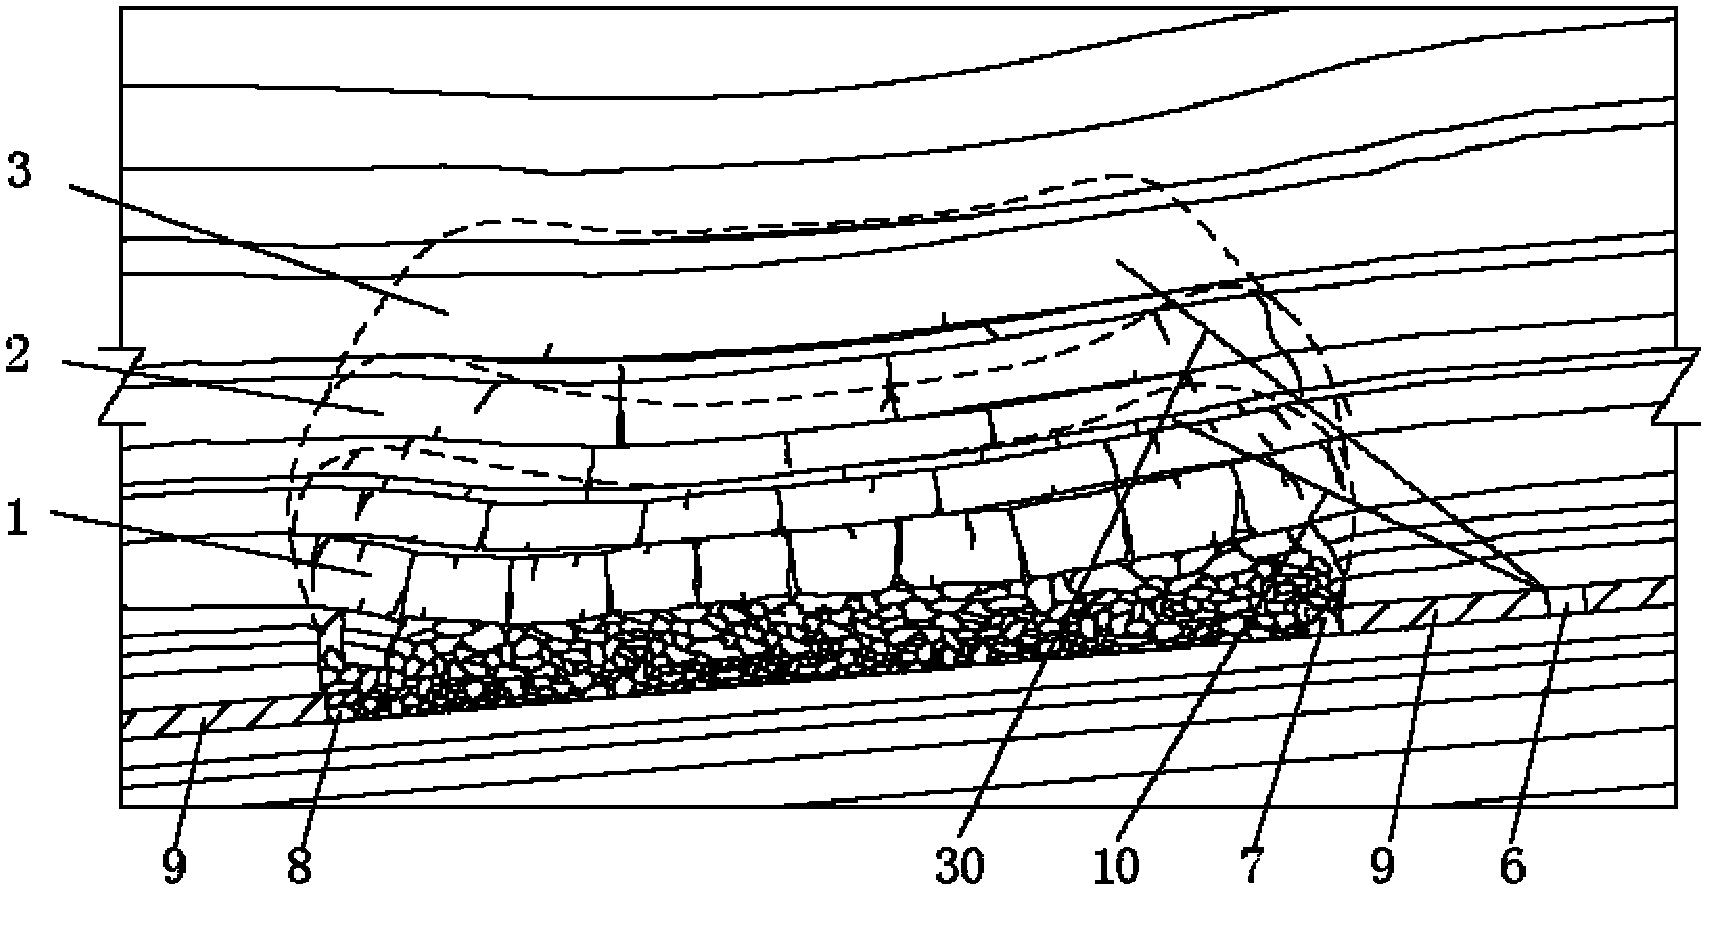 Gas extraction well location method based on overlying rock fracture shell